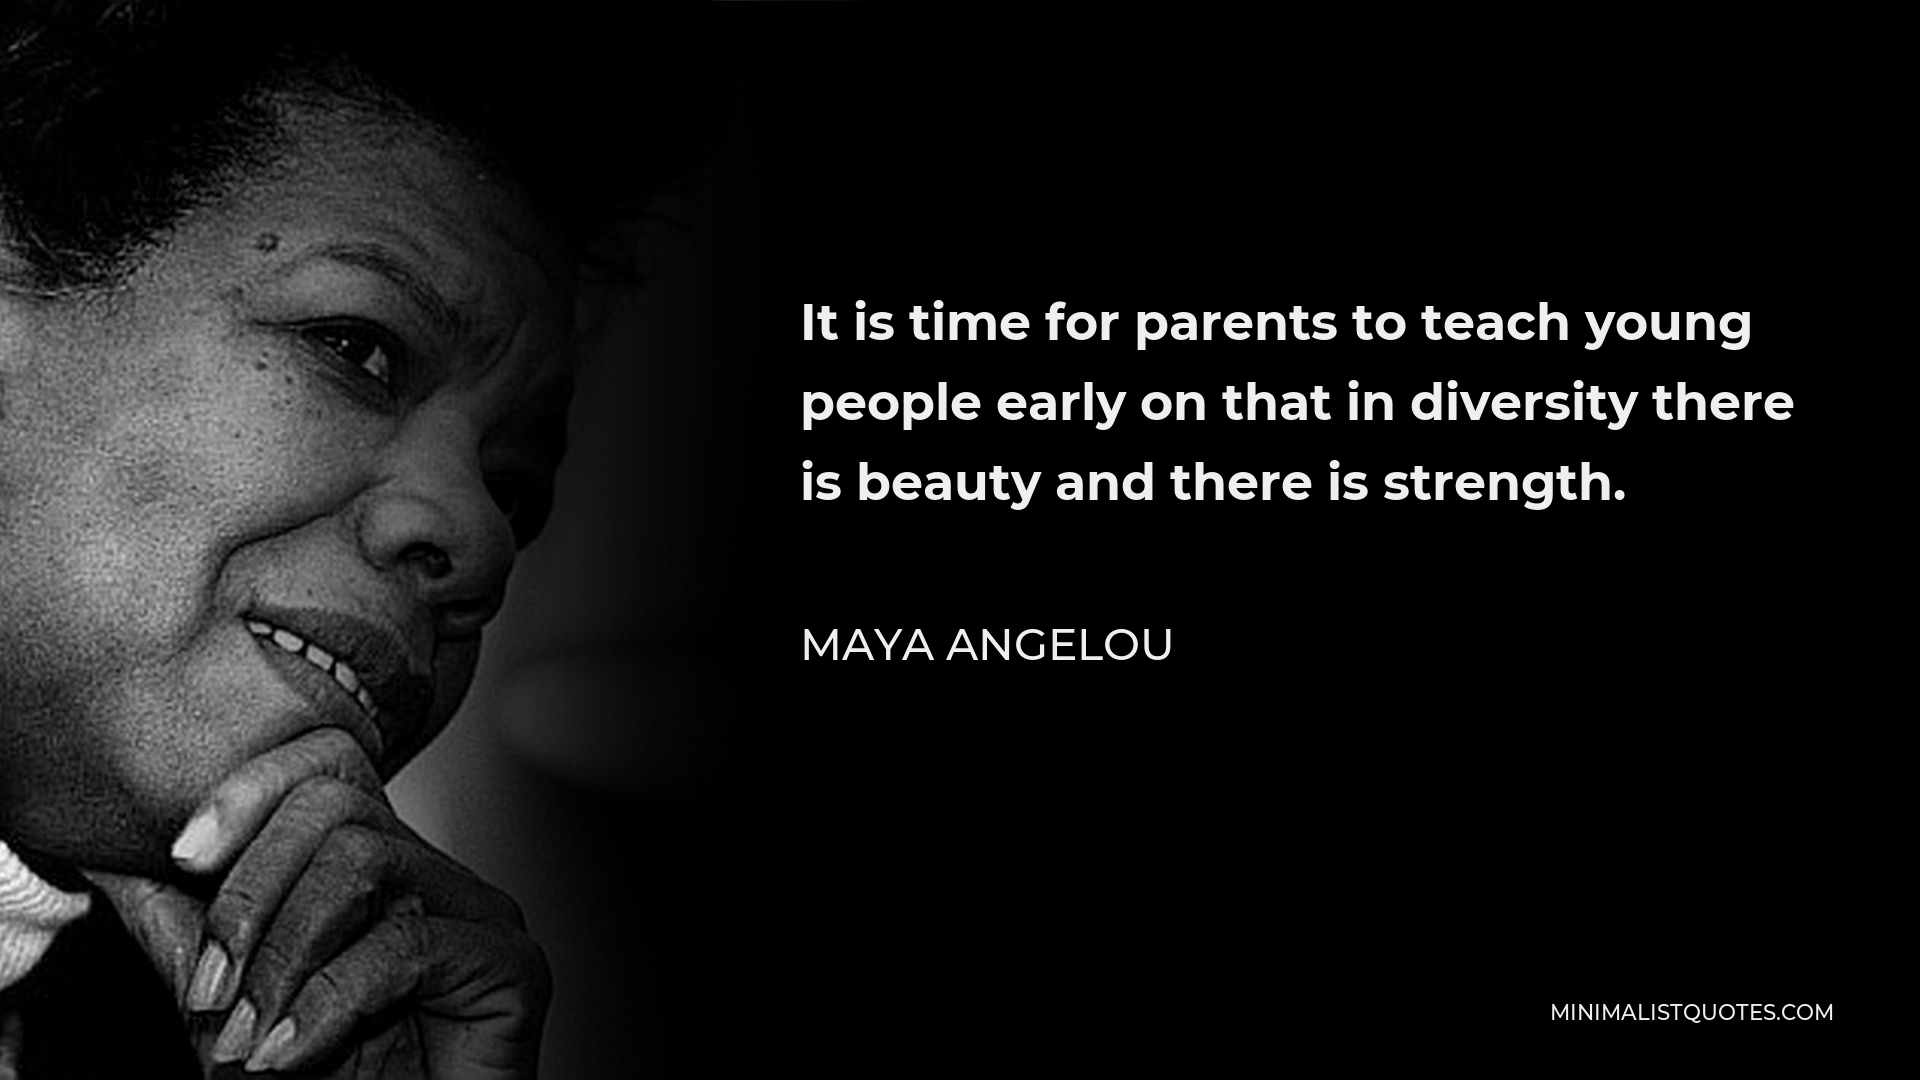 Maya Angelou Quote - It is time for parents to teach young people early on that in diversity there is beauty and there is strength.